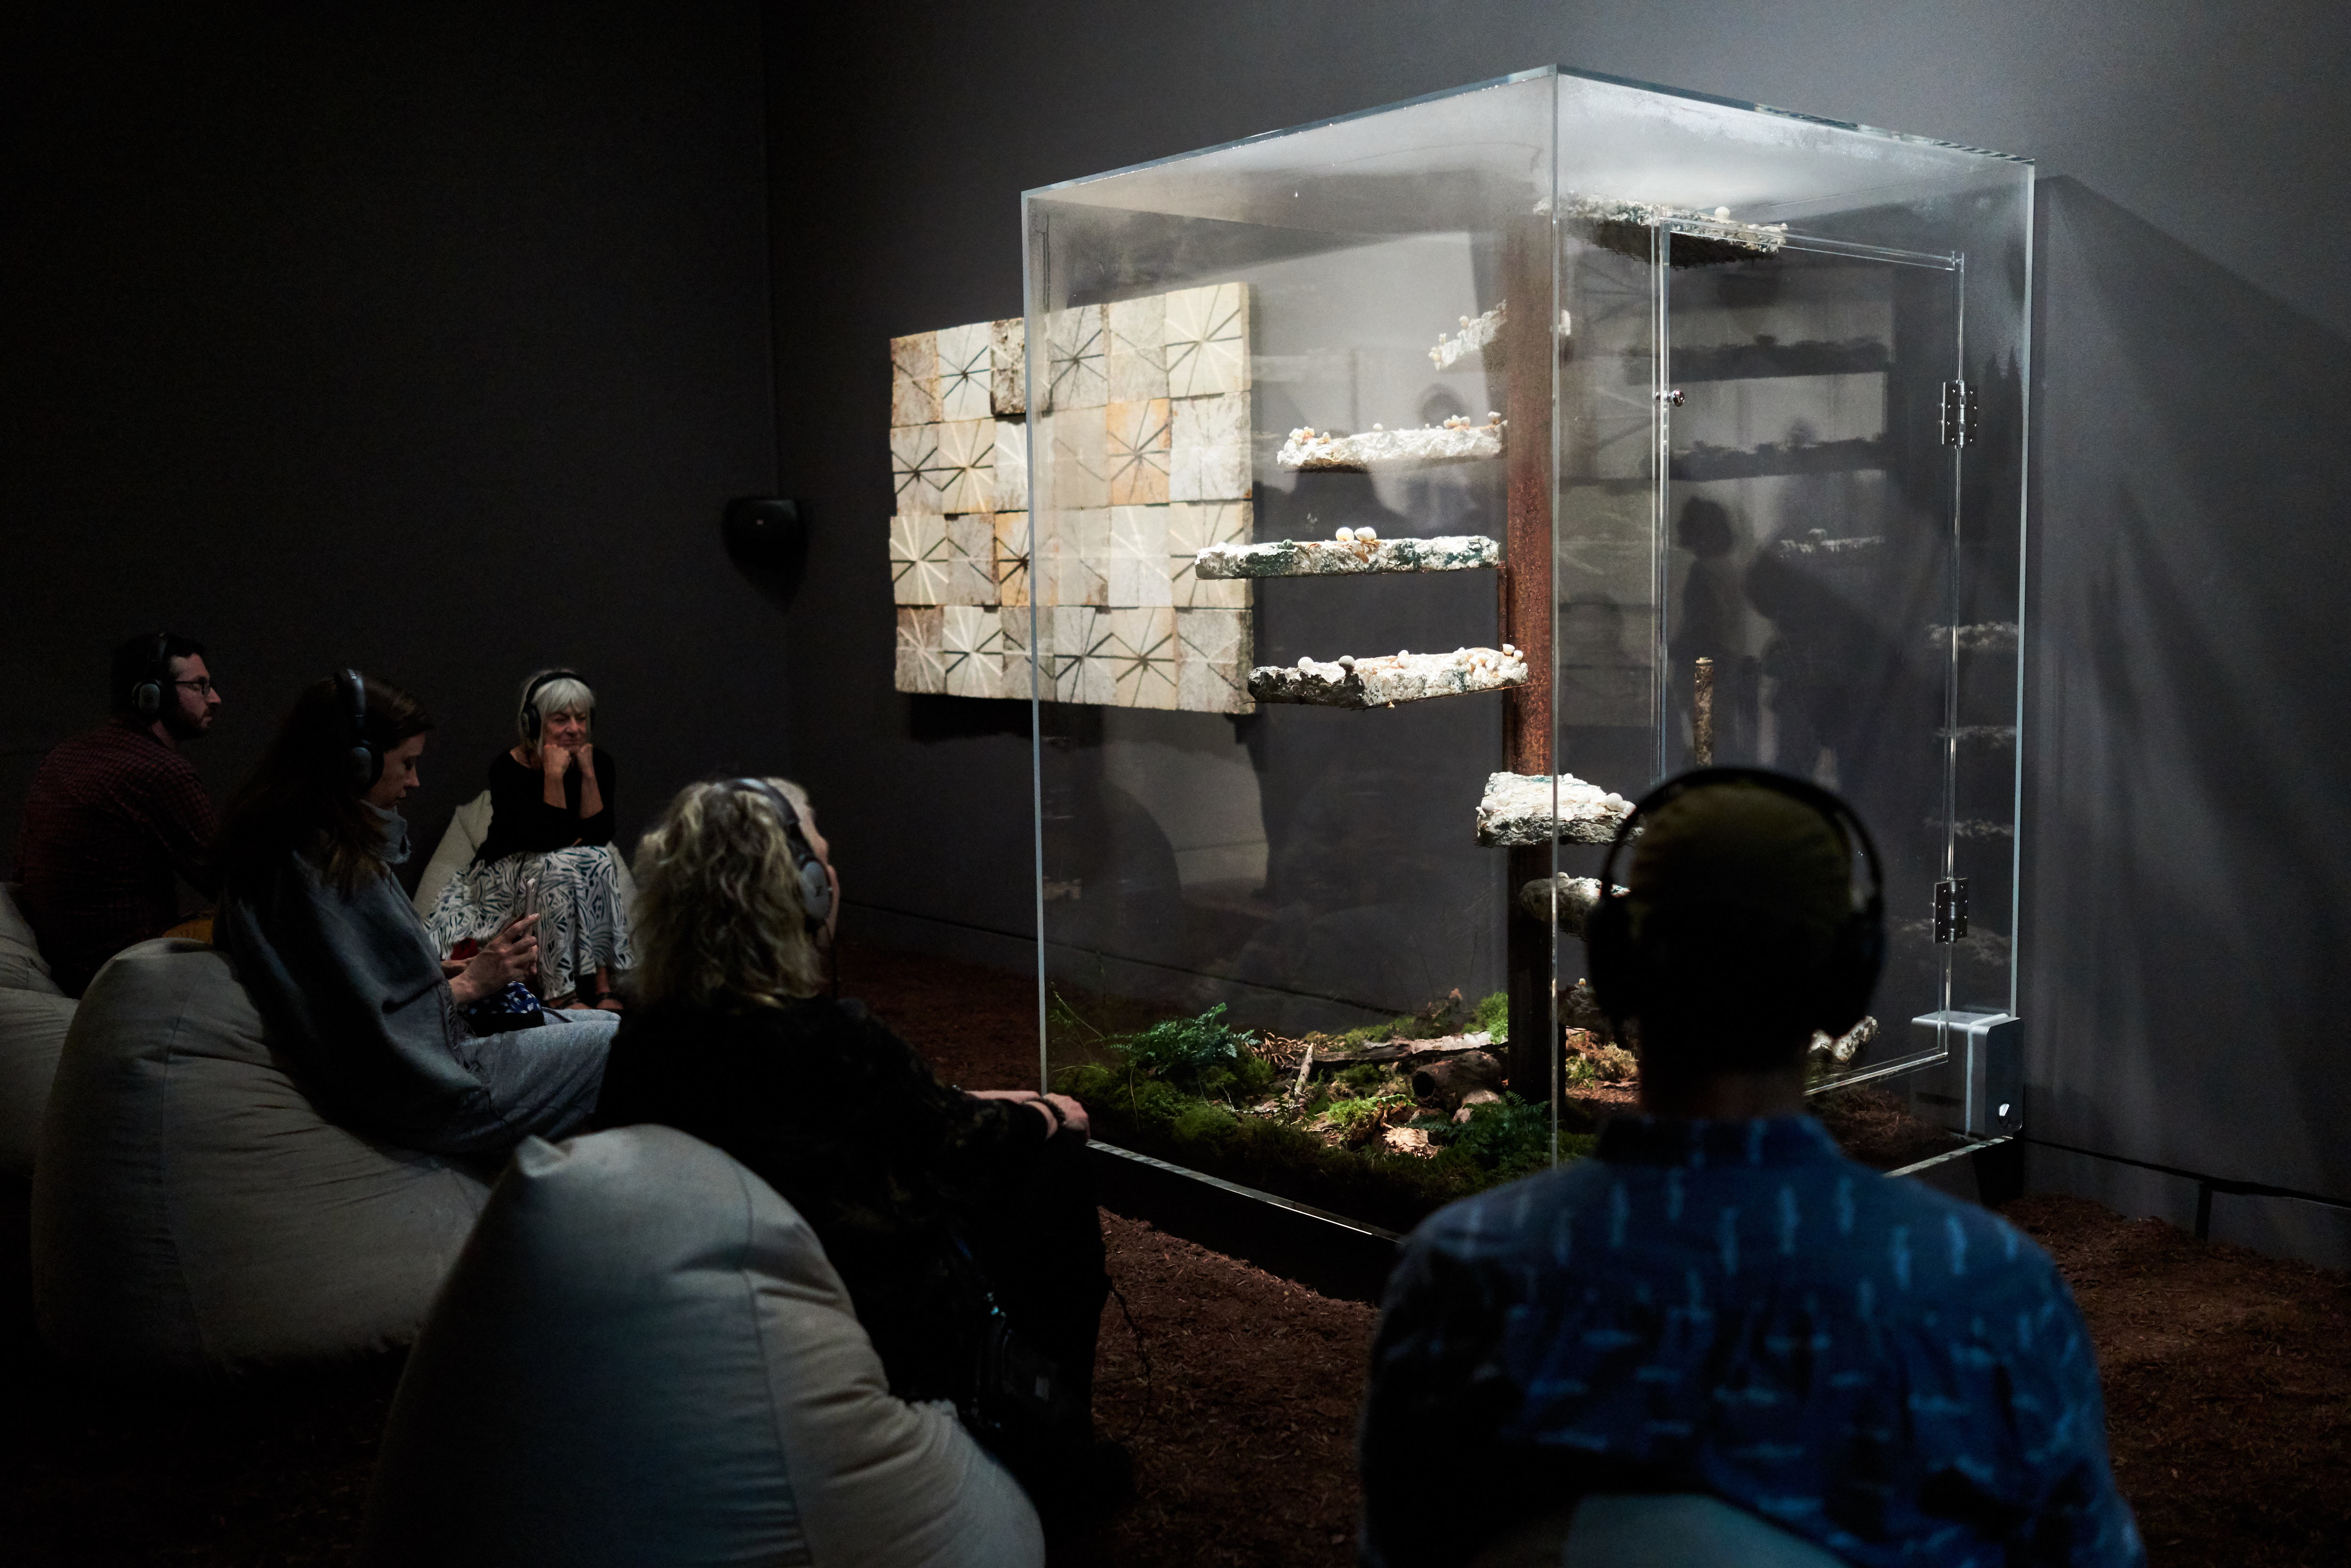 Frye Art Museum visitors spending time with Marcos Lutyens’ “Library of Babel, a Symbiont Induction”  PHOTO CREDIT: Jonathan Vanderweit